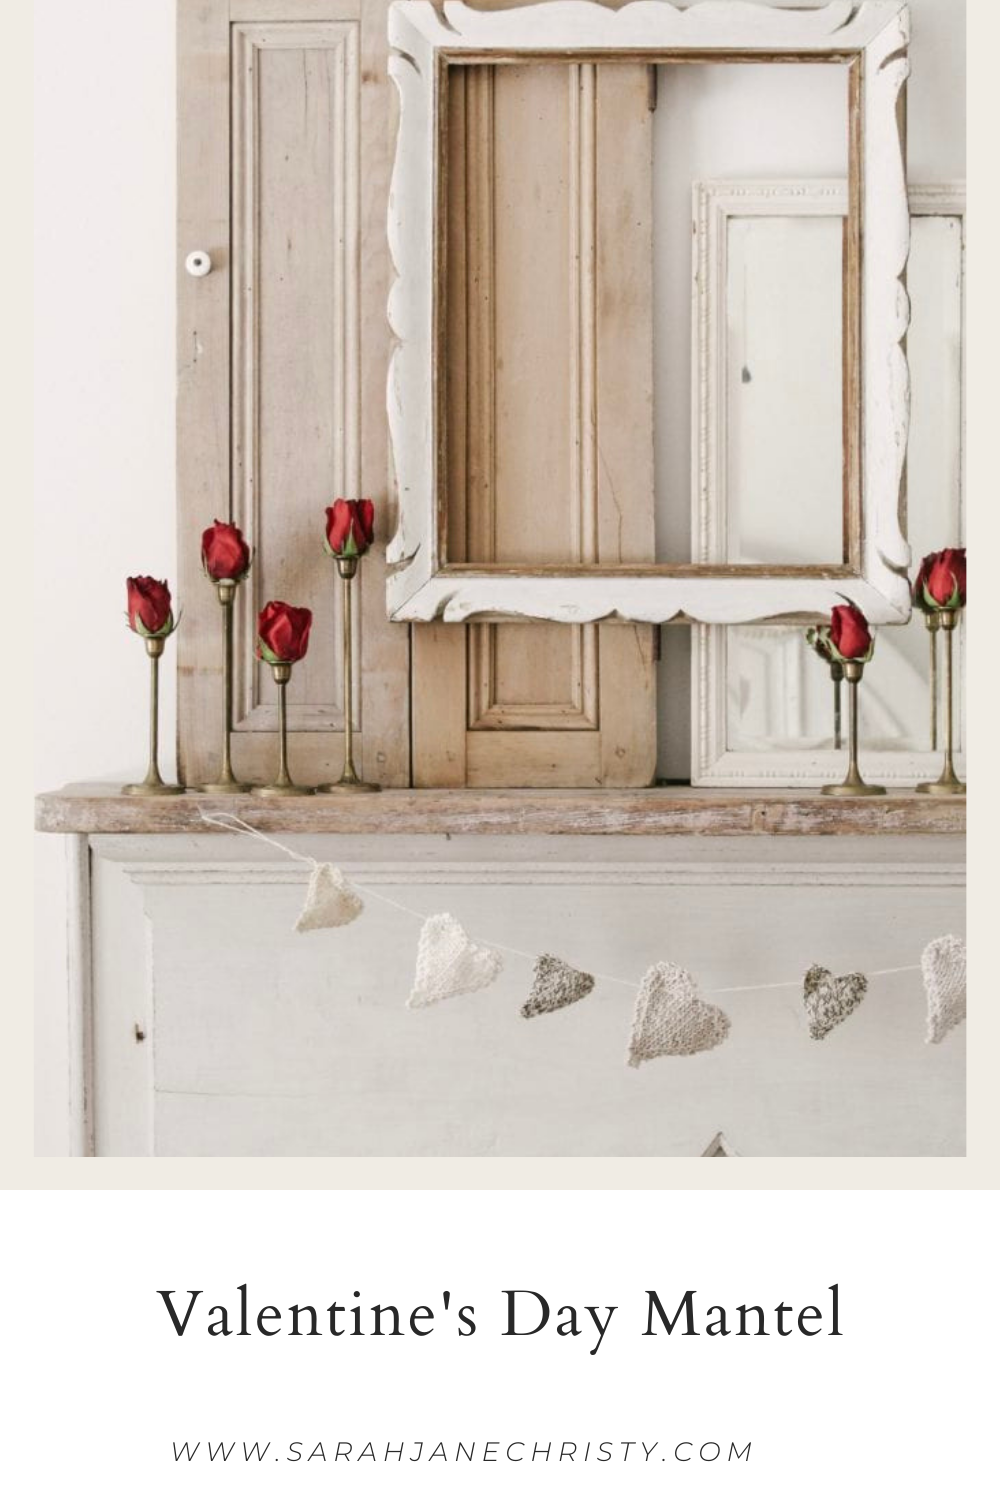 Romantic Valentine's Day Mantel with Roses